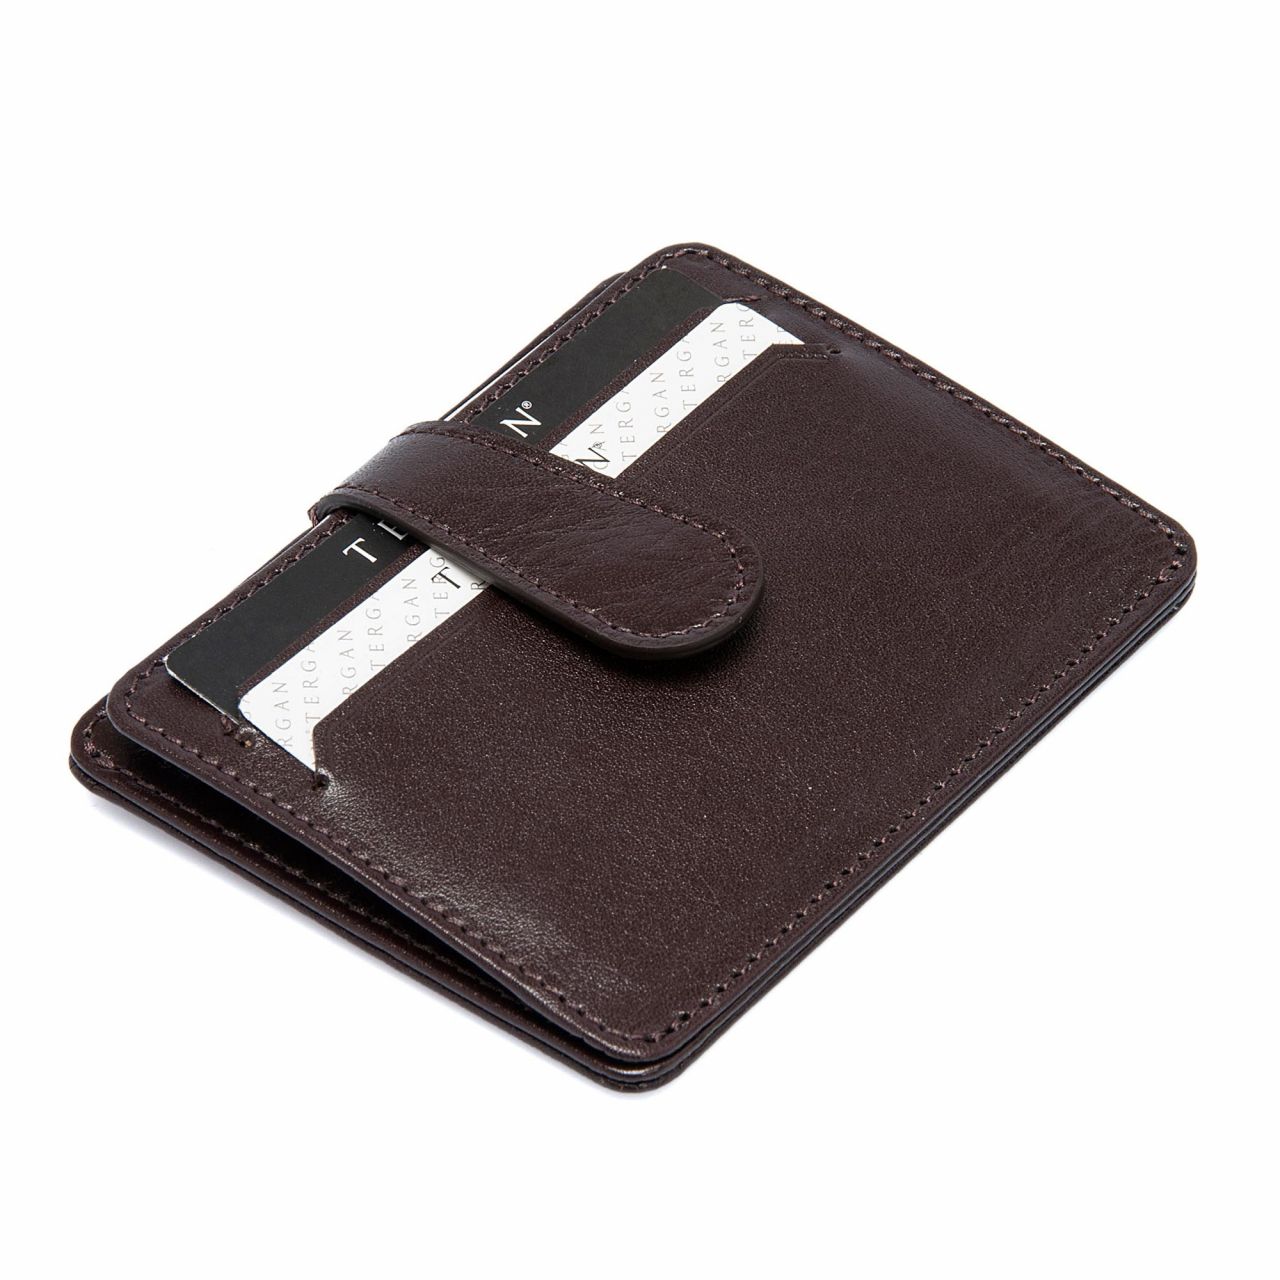 Brown leather credit card holders